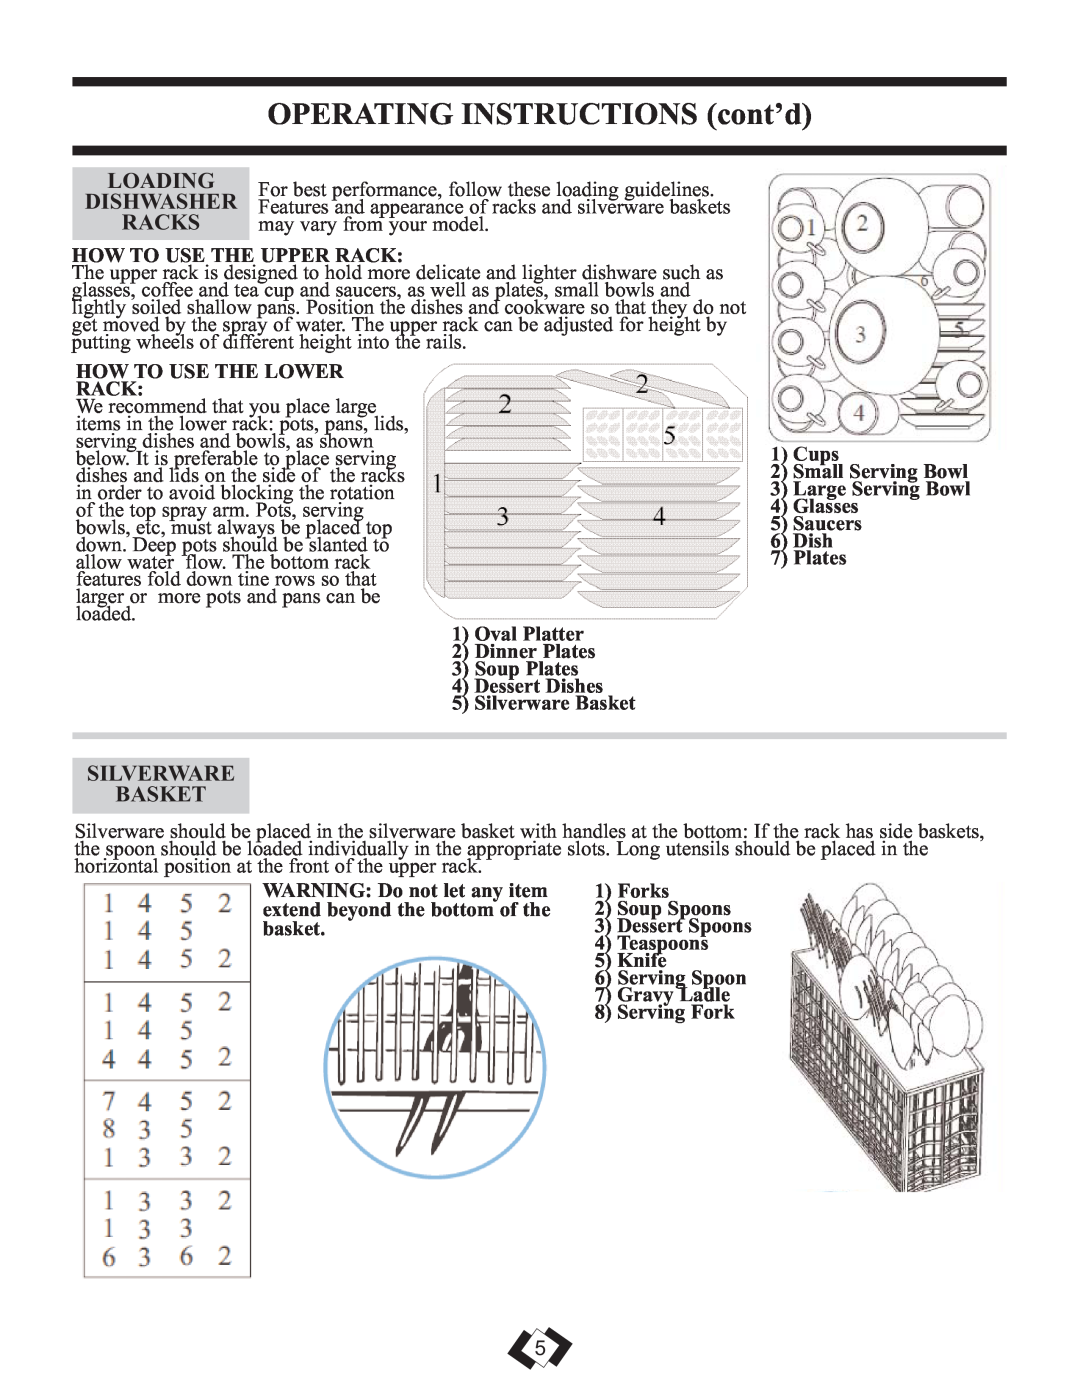 Danby DDW1809W operating instructions OPERATING INSTRUCTIONS cont’d, Loading, Dishwasher, Racks, Silverware Basket 